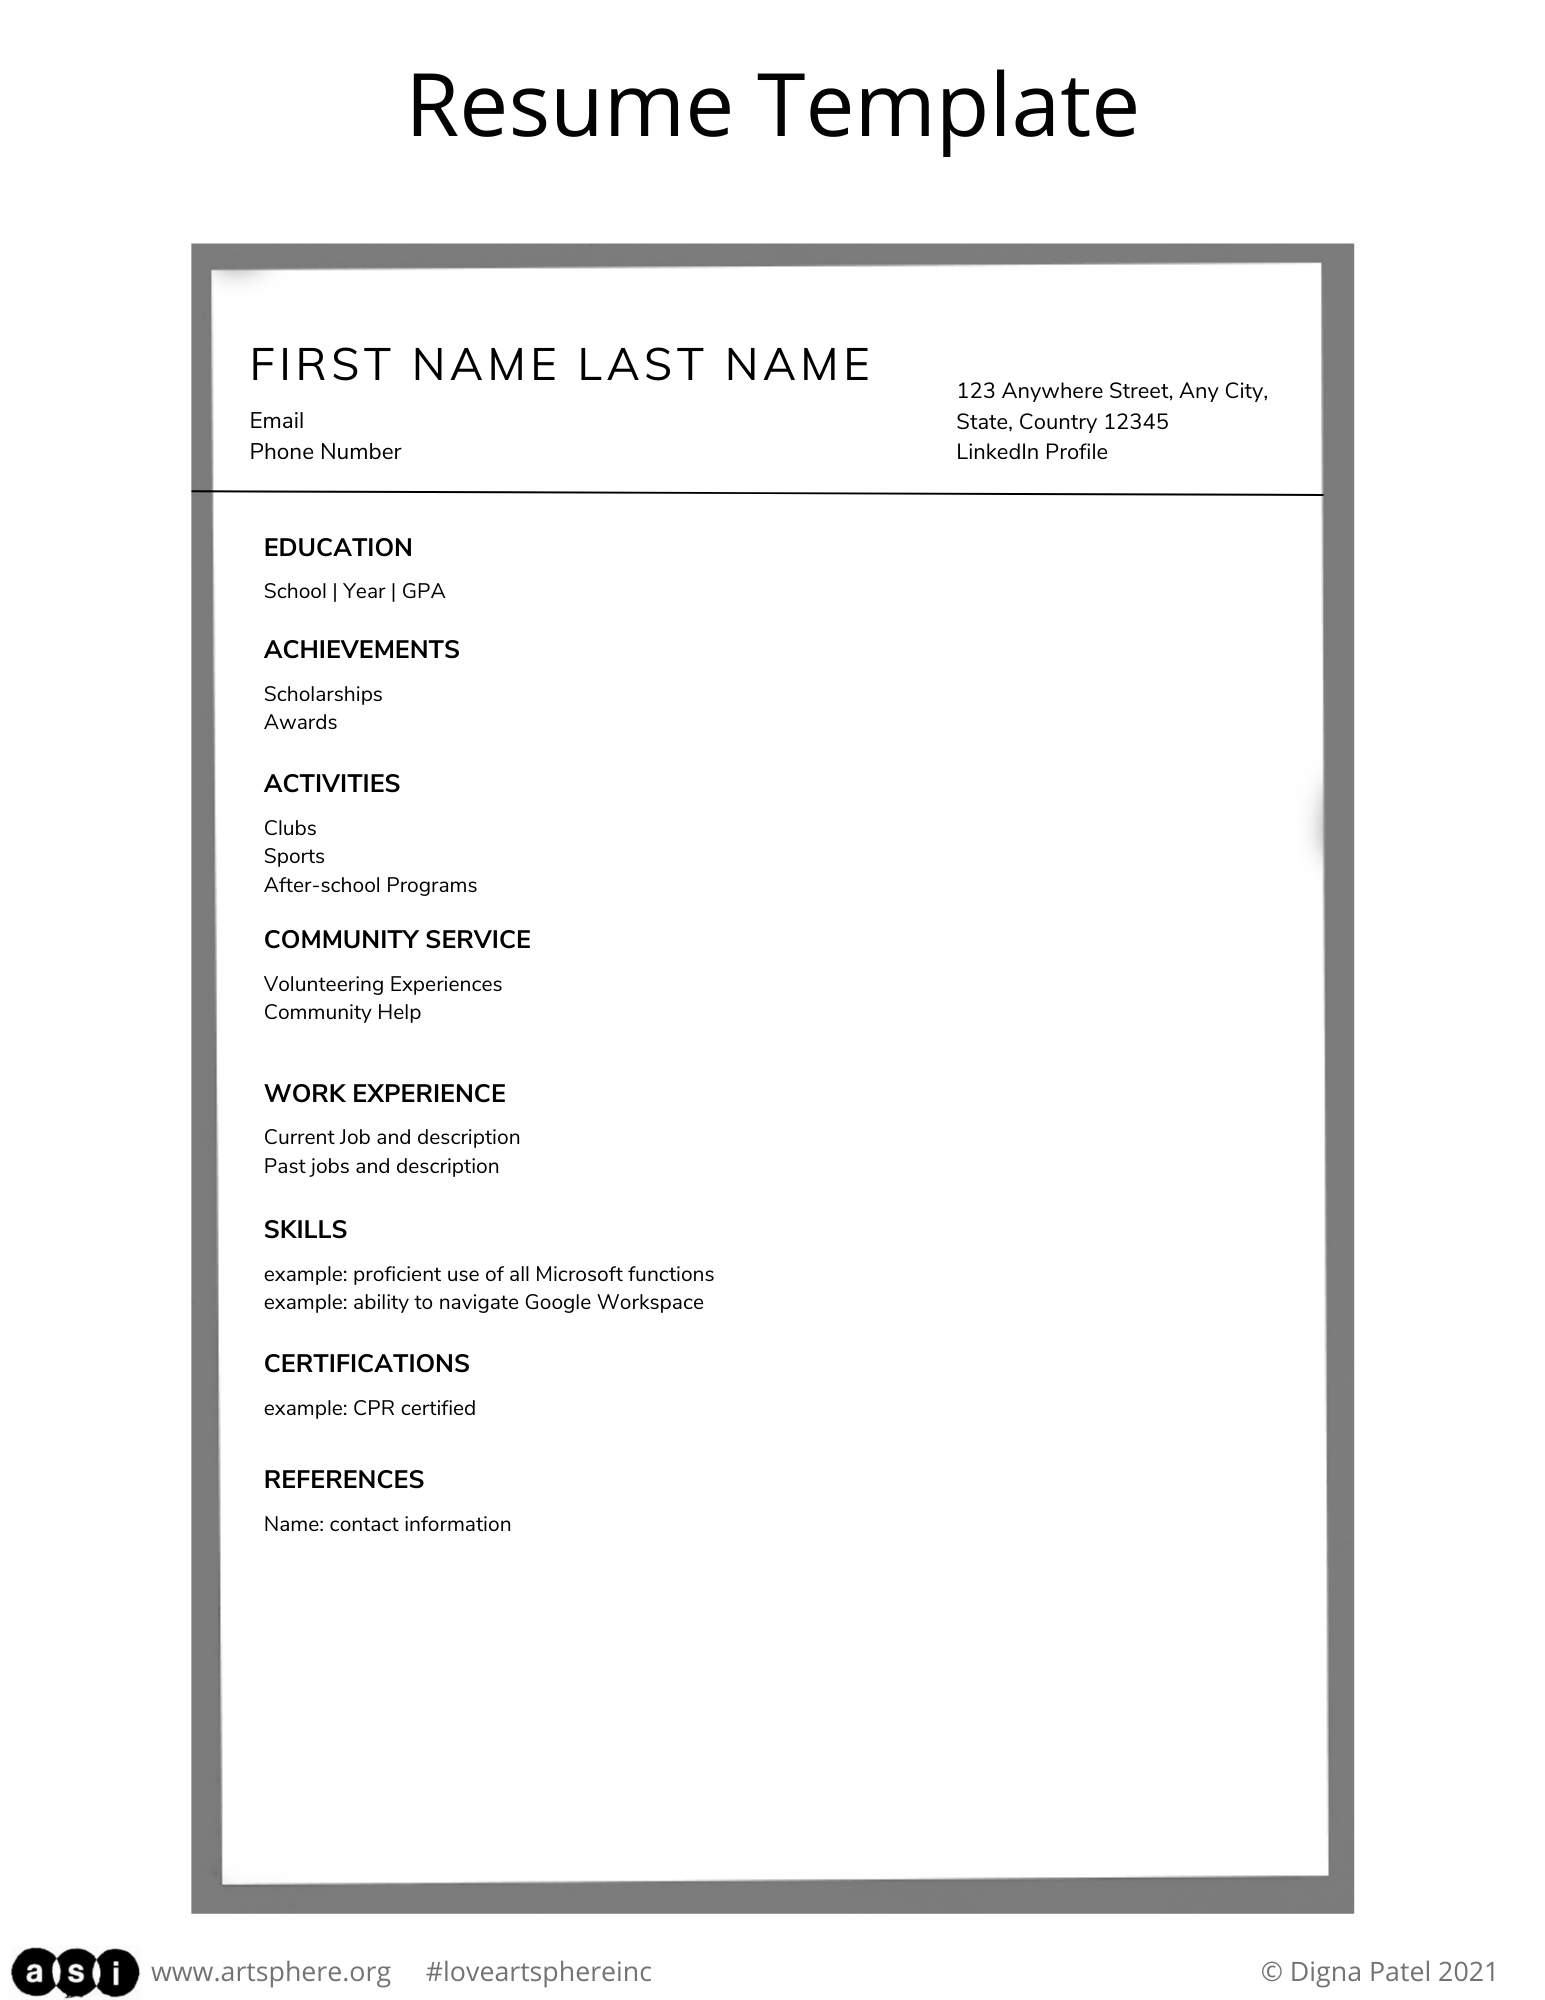 how to write a resume on paper